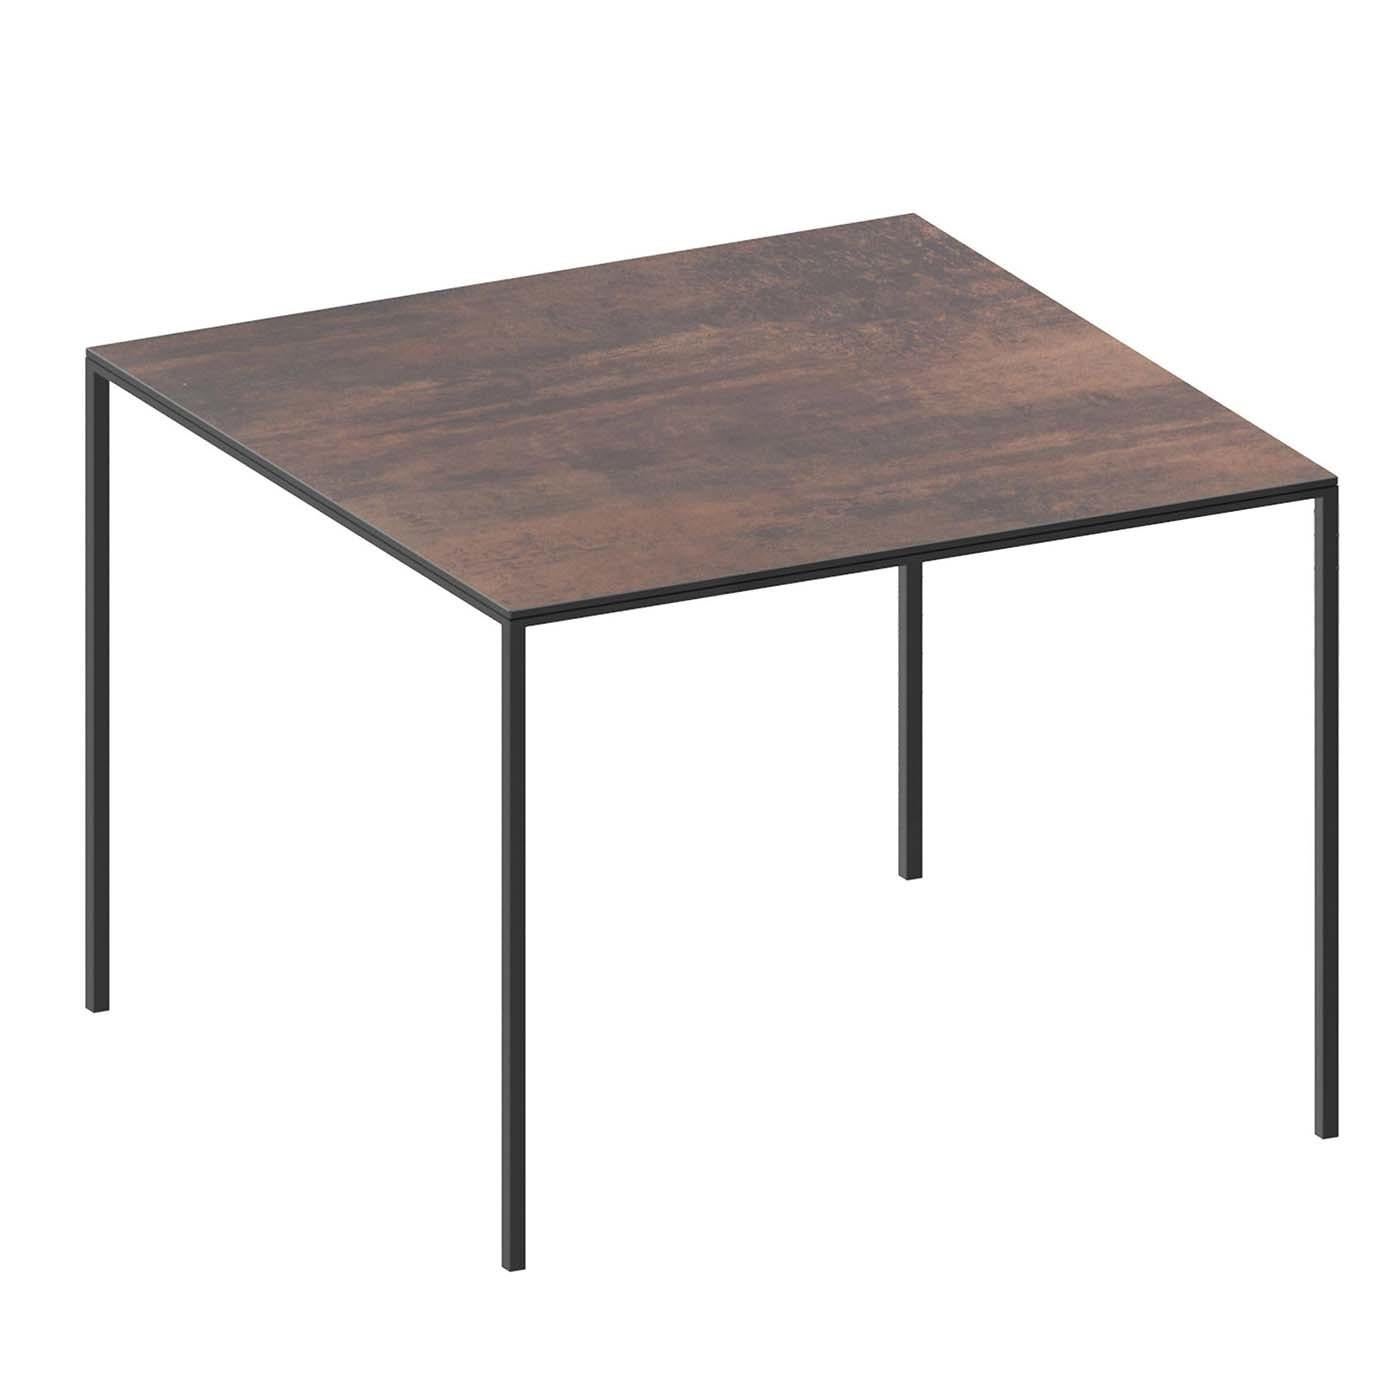 The choice to combine industrial and natural materials is the trademark of all Zeus designs that focus on the raw elegance of each element composing them. This small table features a minimalist square steel tube frame (20 x 30 mm) with four legs in